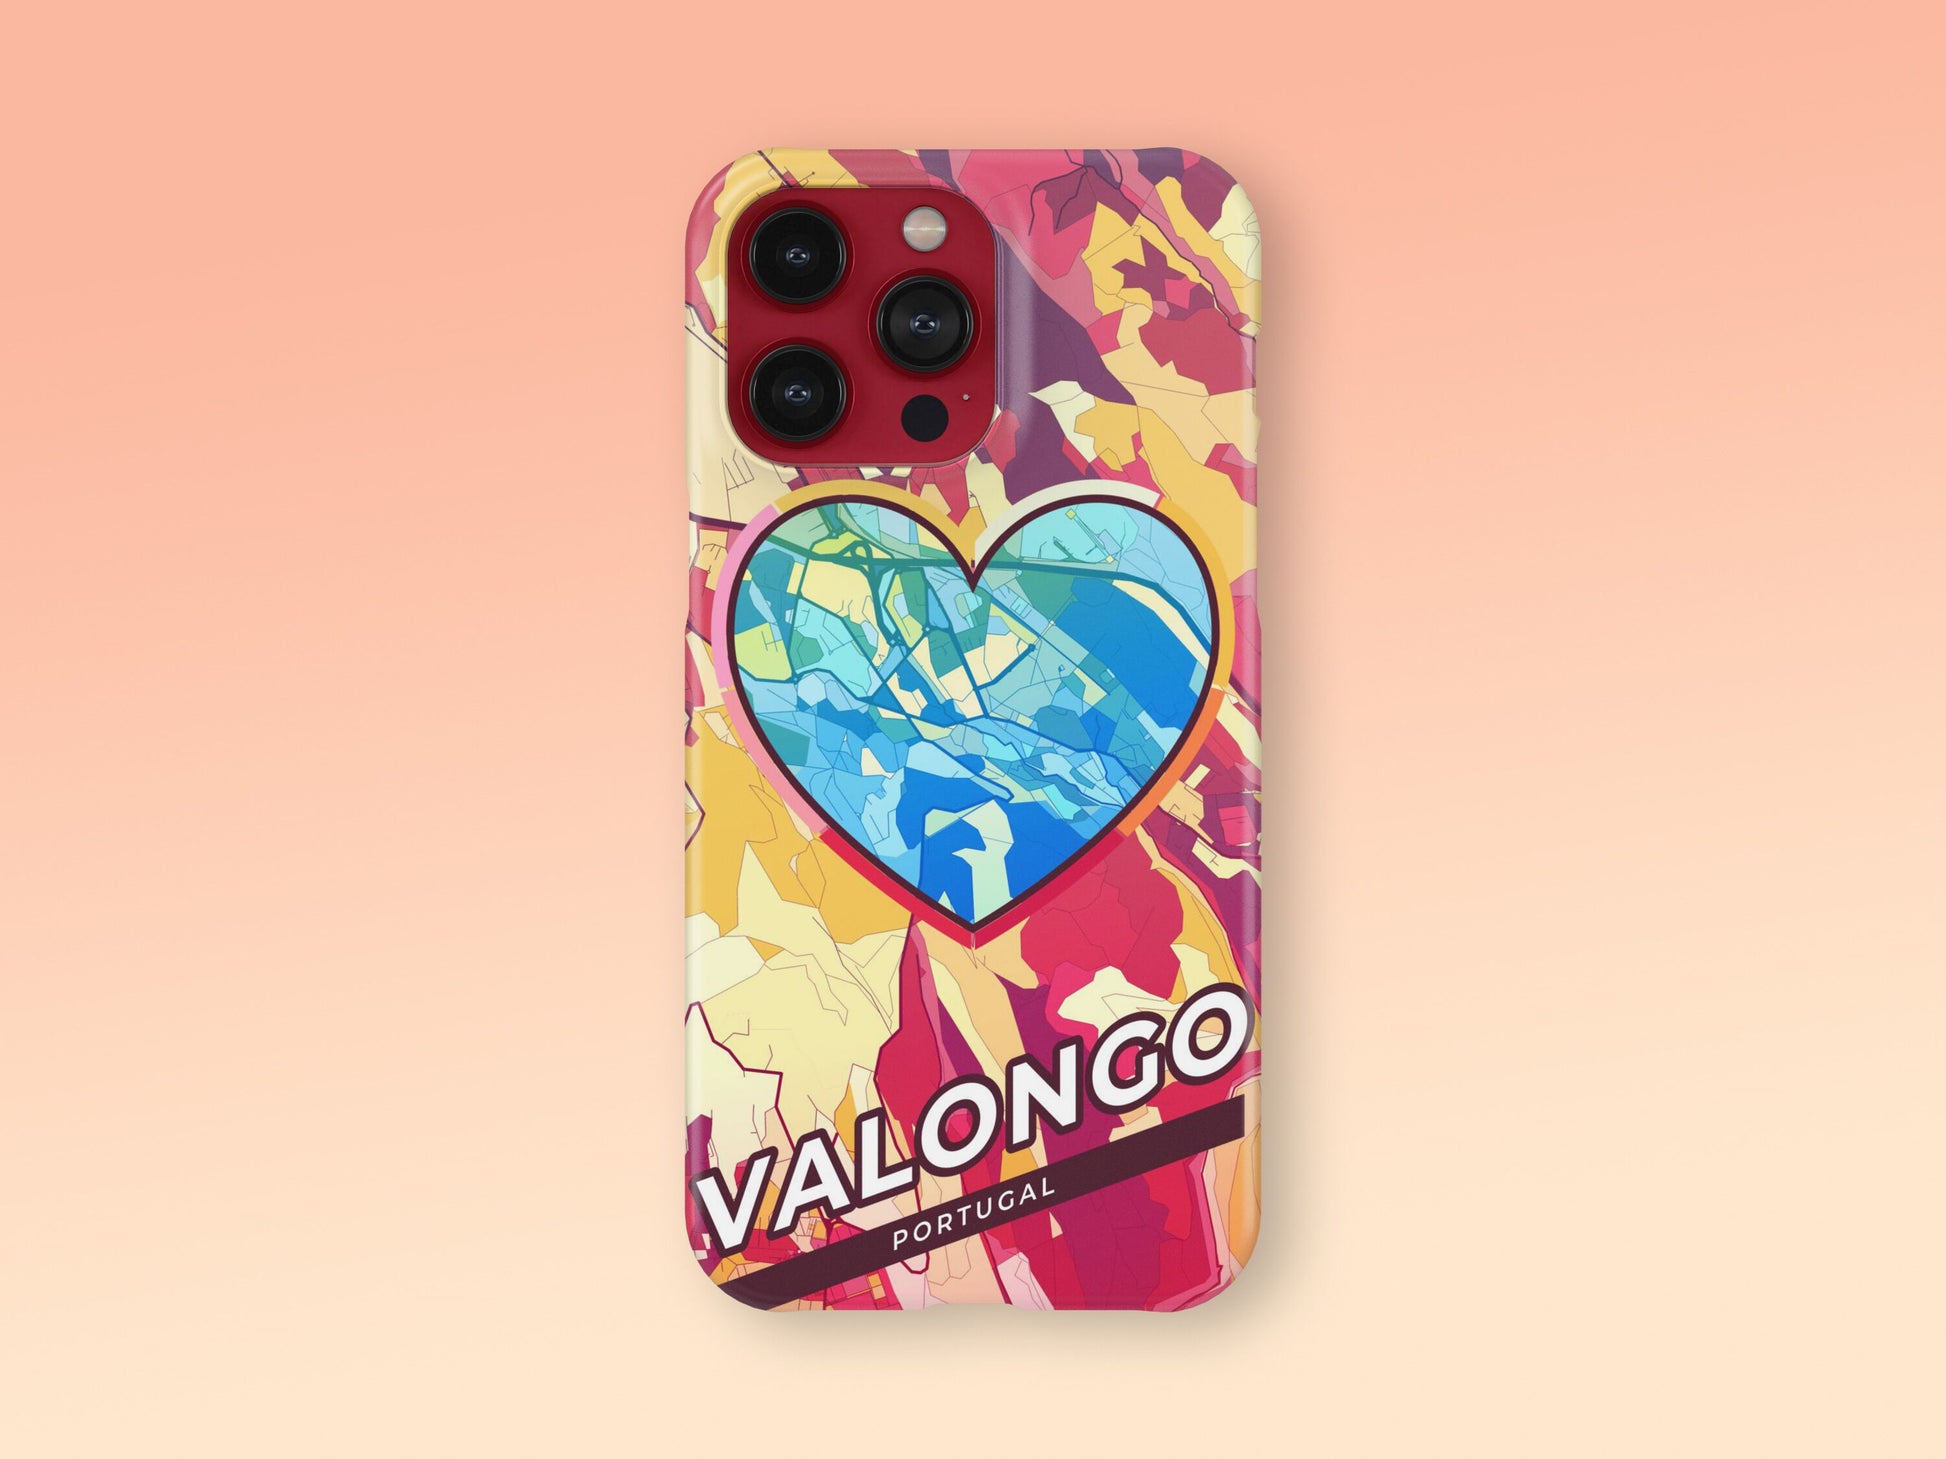 Valongo Portugal slim phone case with colorful icon 2